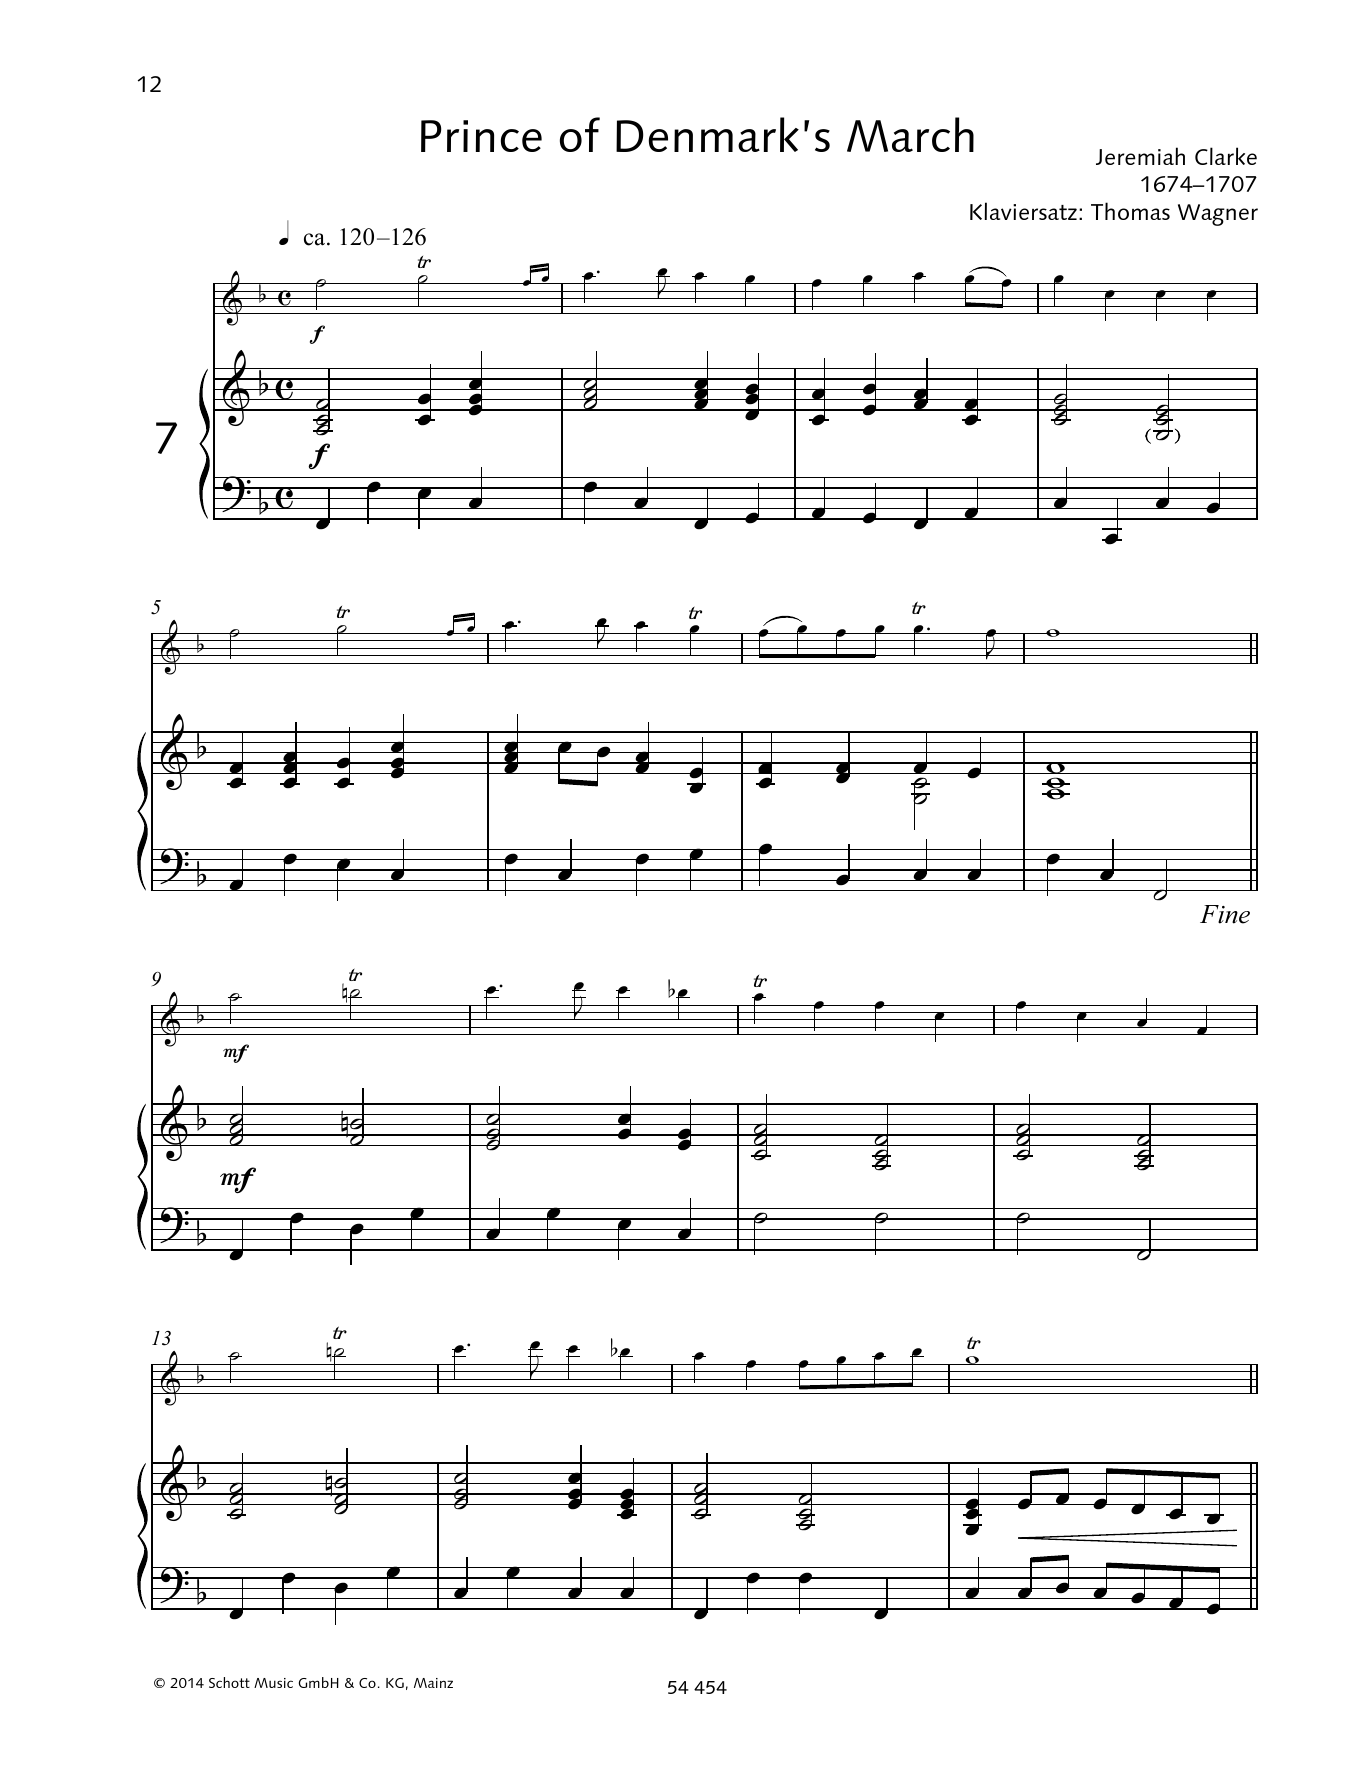 Download Jeremiah Clarke Prince of Denmark's March Sheet Music